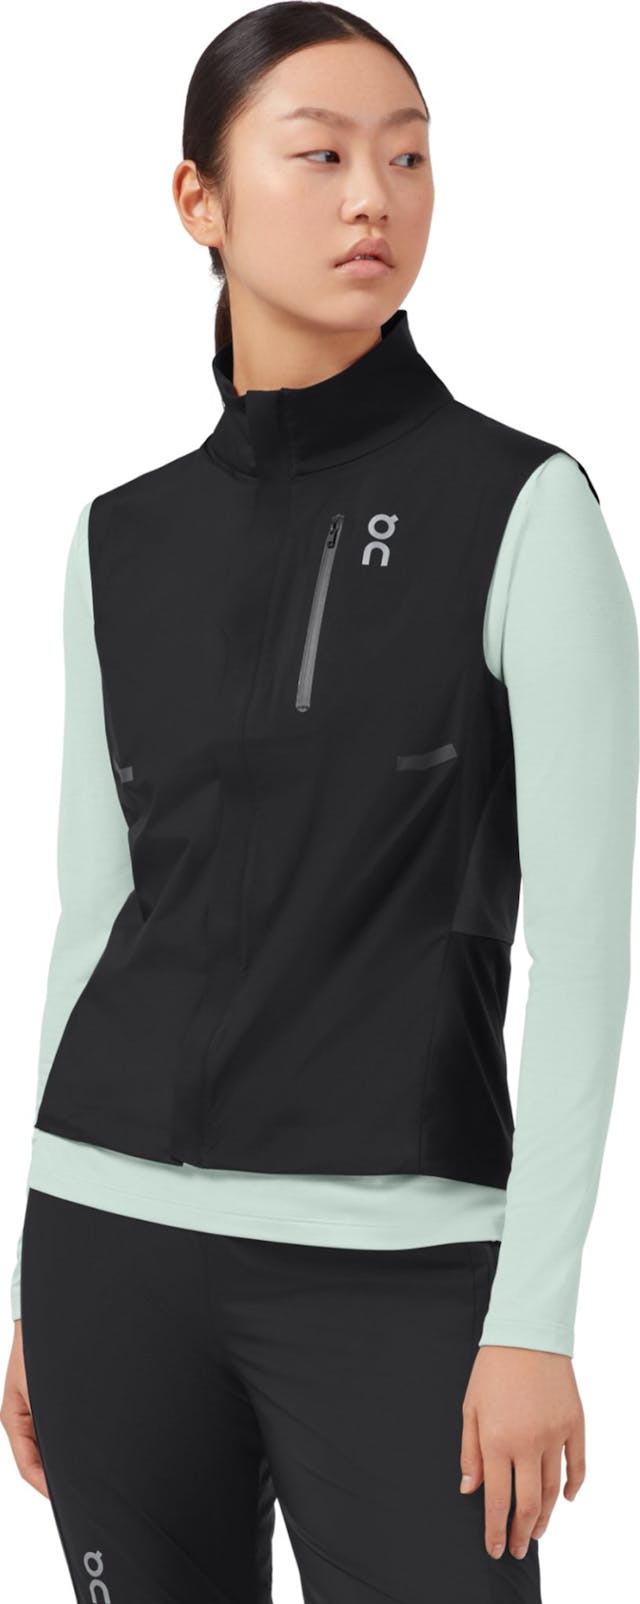 Product image for Weather Vest - Women's